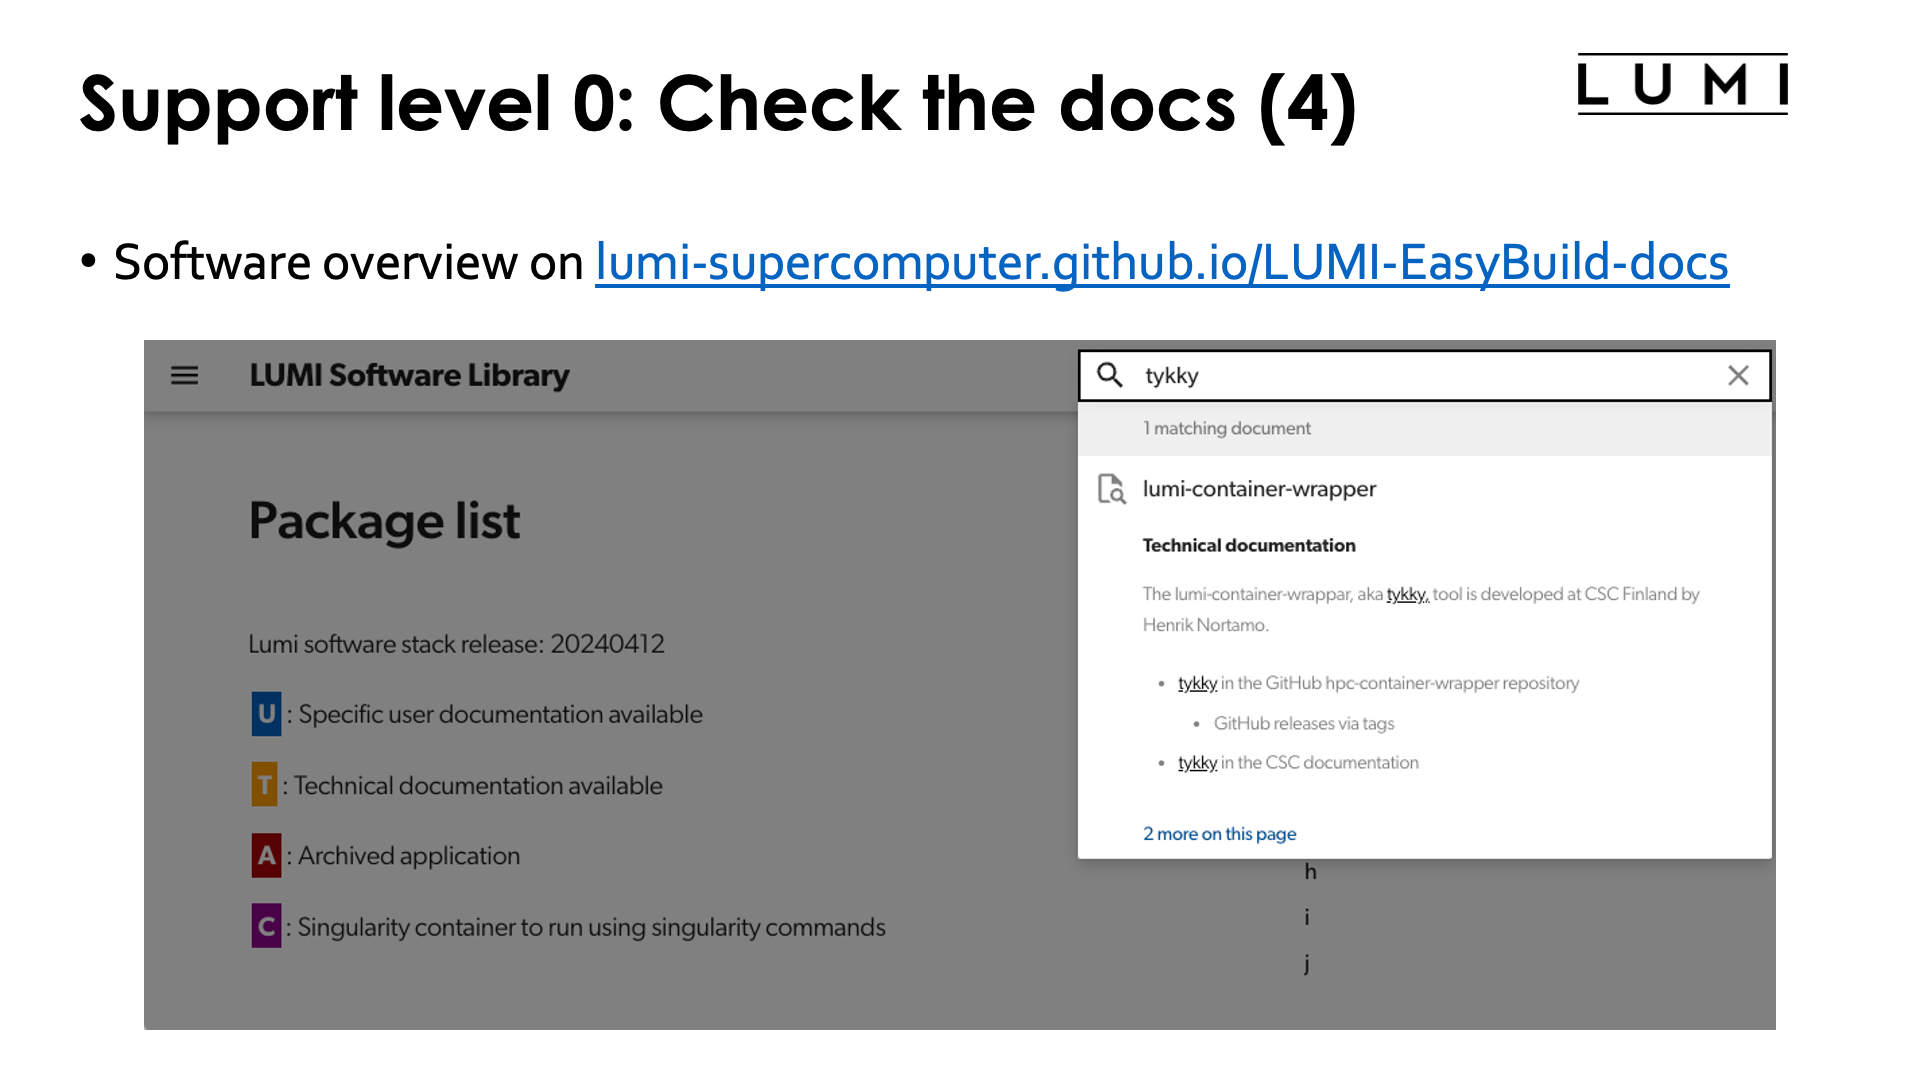 L0 support: Check the docs! (4)